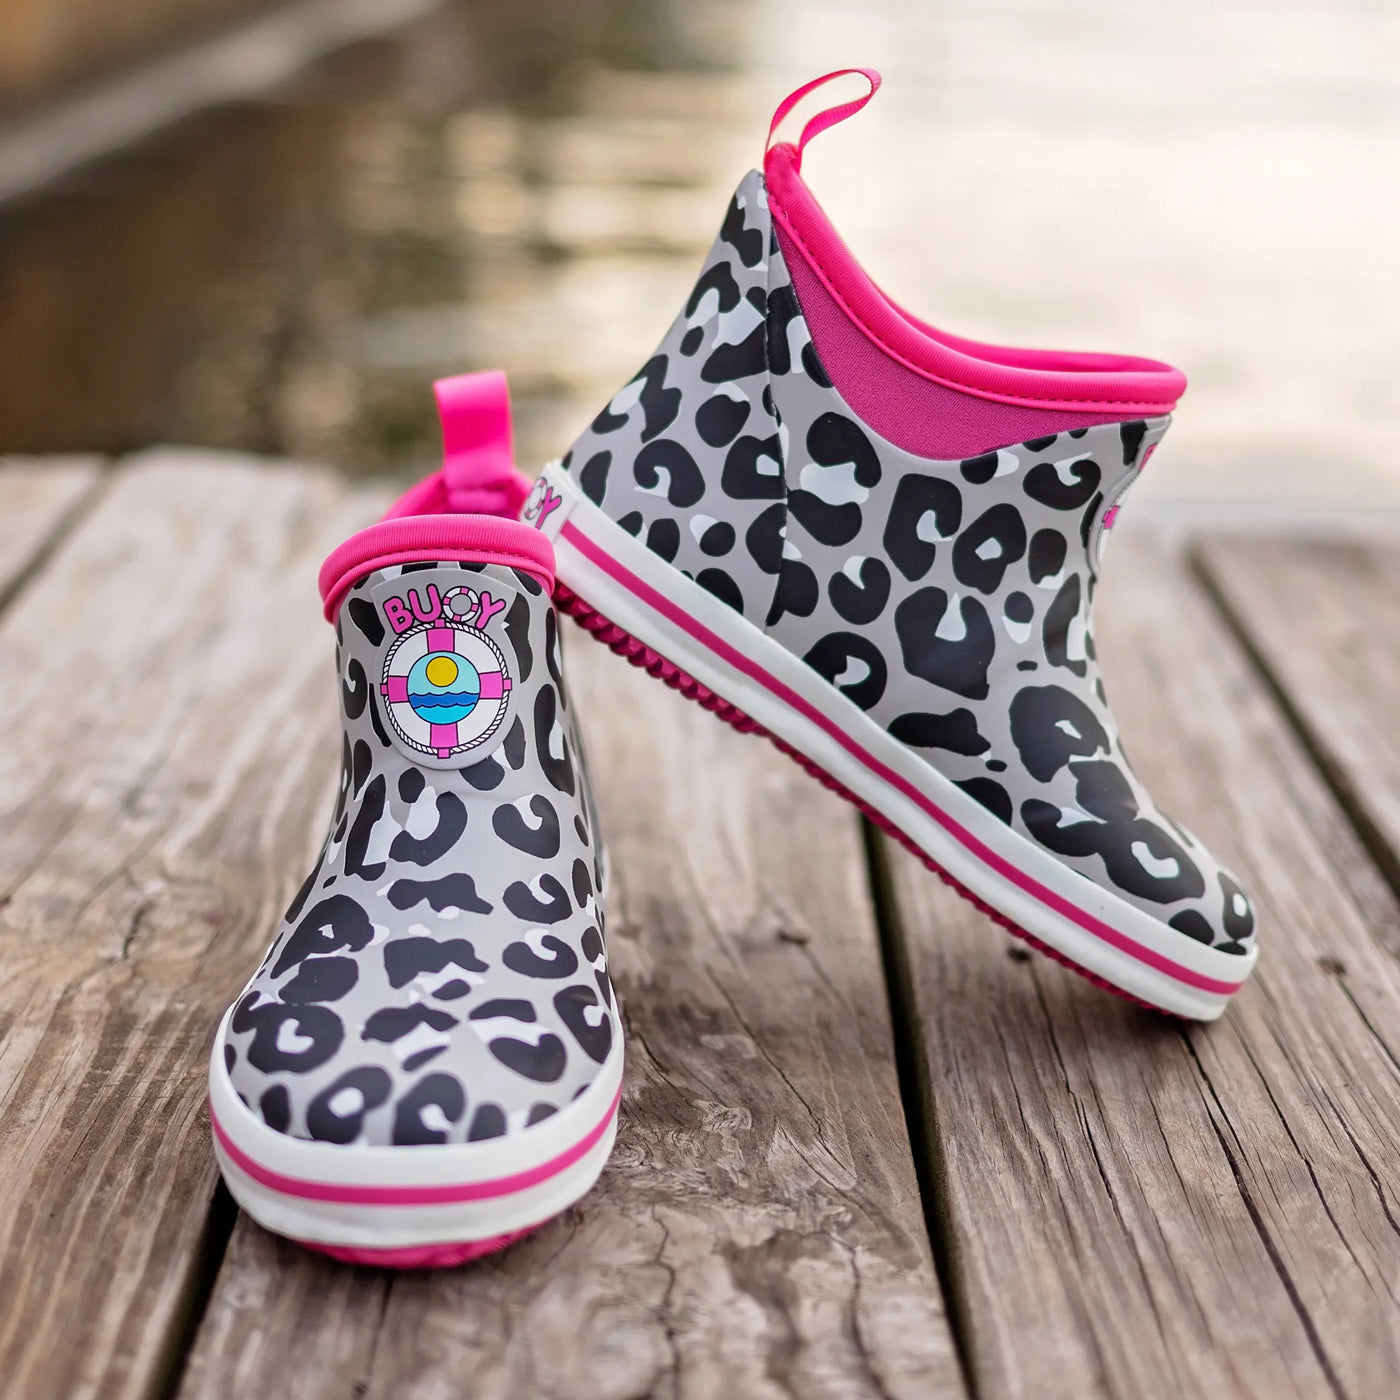 BUOY BOOTS-Kid's ankle boot cheetah print